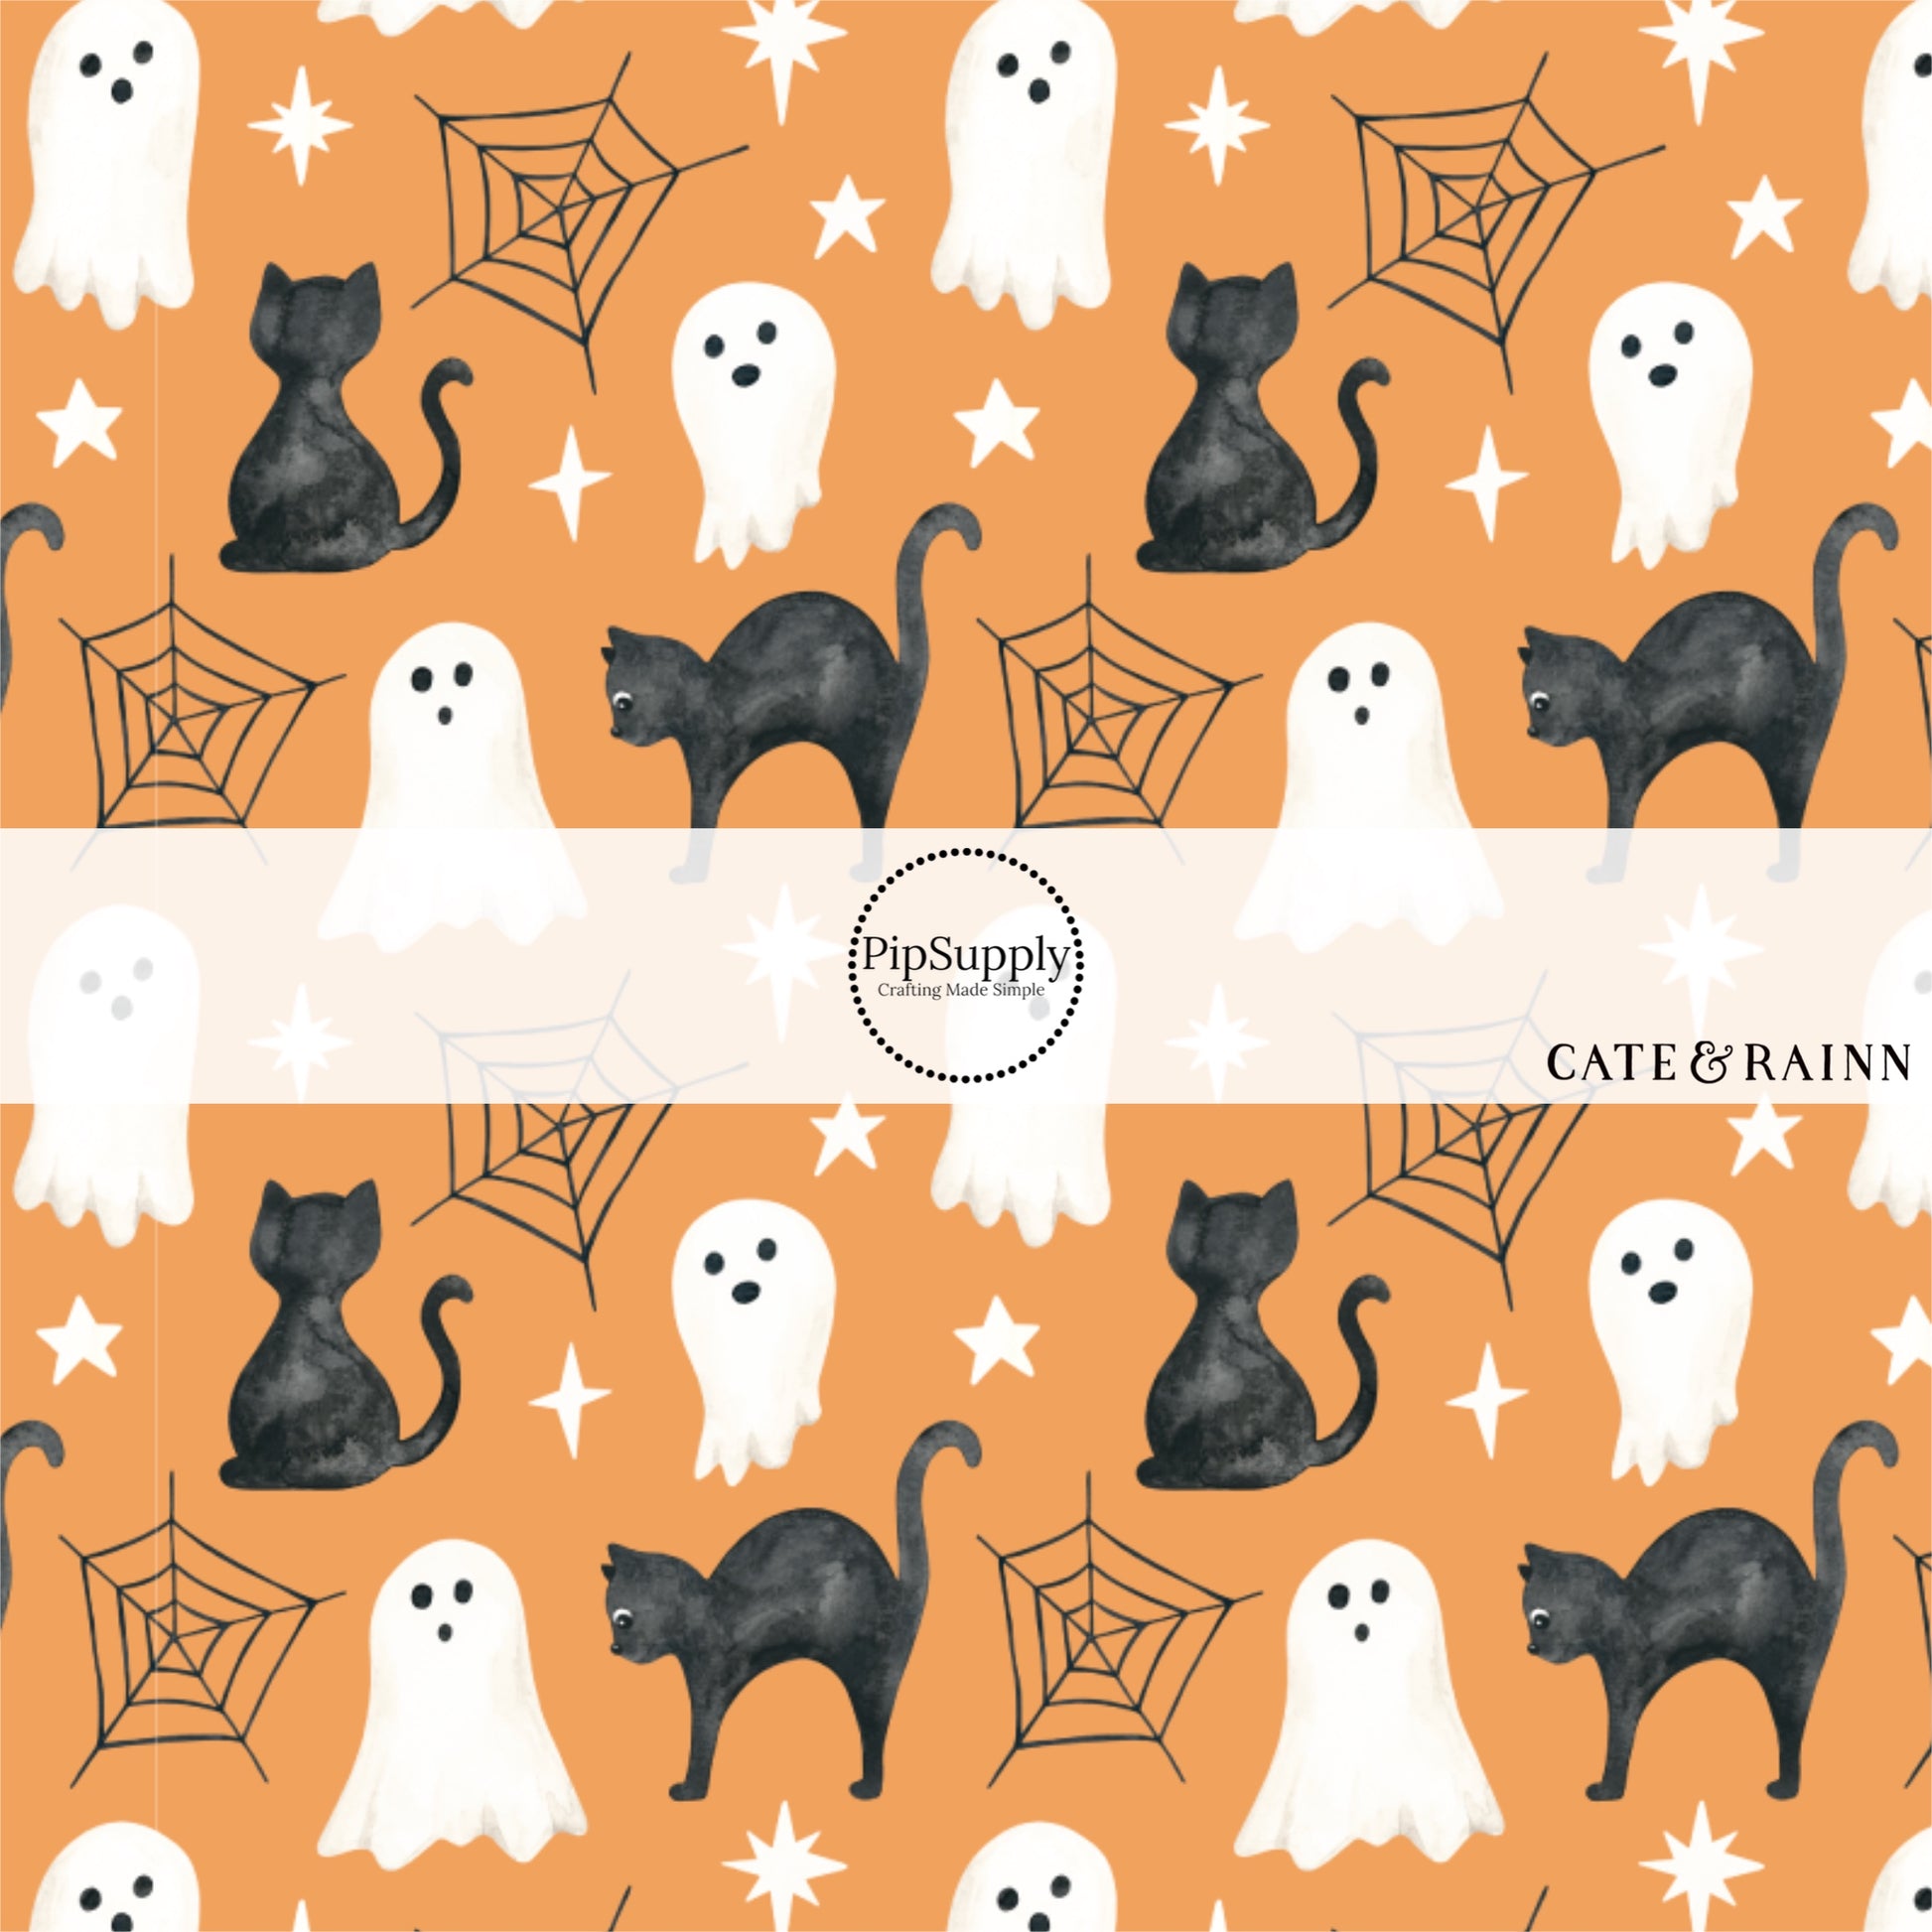 These Halloween themed orange headband kits are easy to assemble and come with everything you need to make your own knotted headband. These fun spooky kits include a custom printed and sewn fabric strip and a coordinating velvet headband. The headband kits features black cats, ghost, spiderwebs, and small white stars on orange.